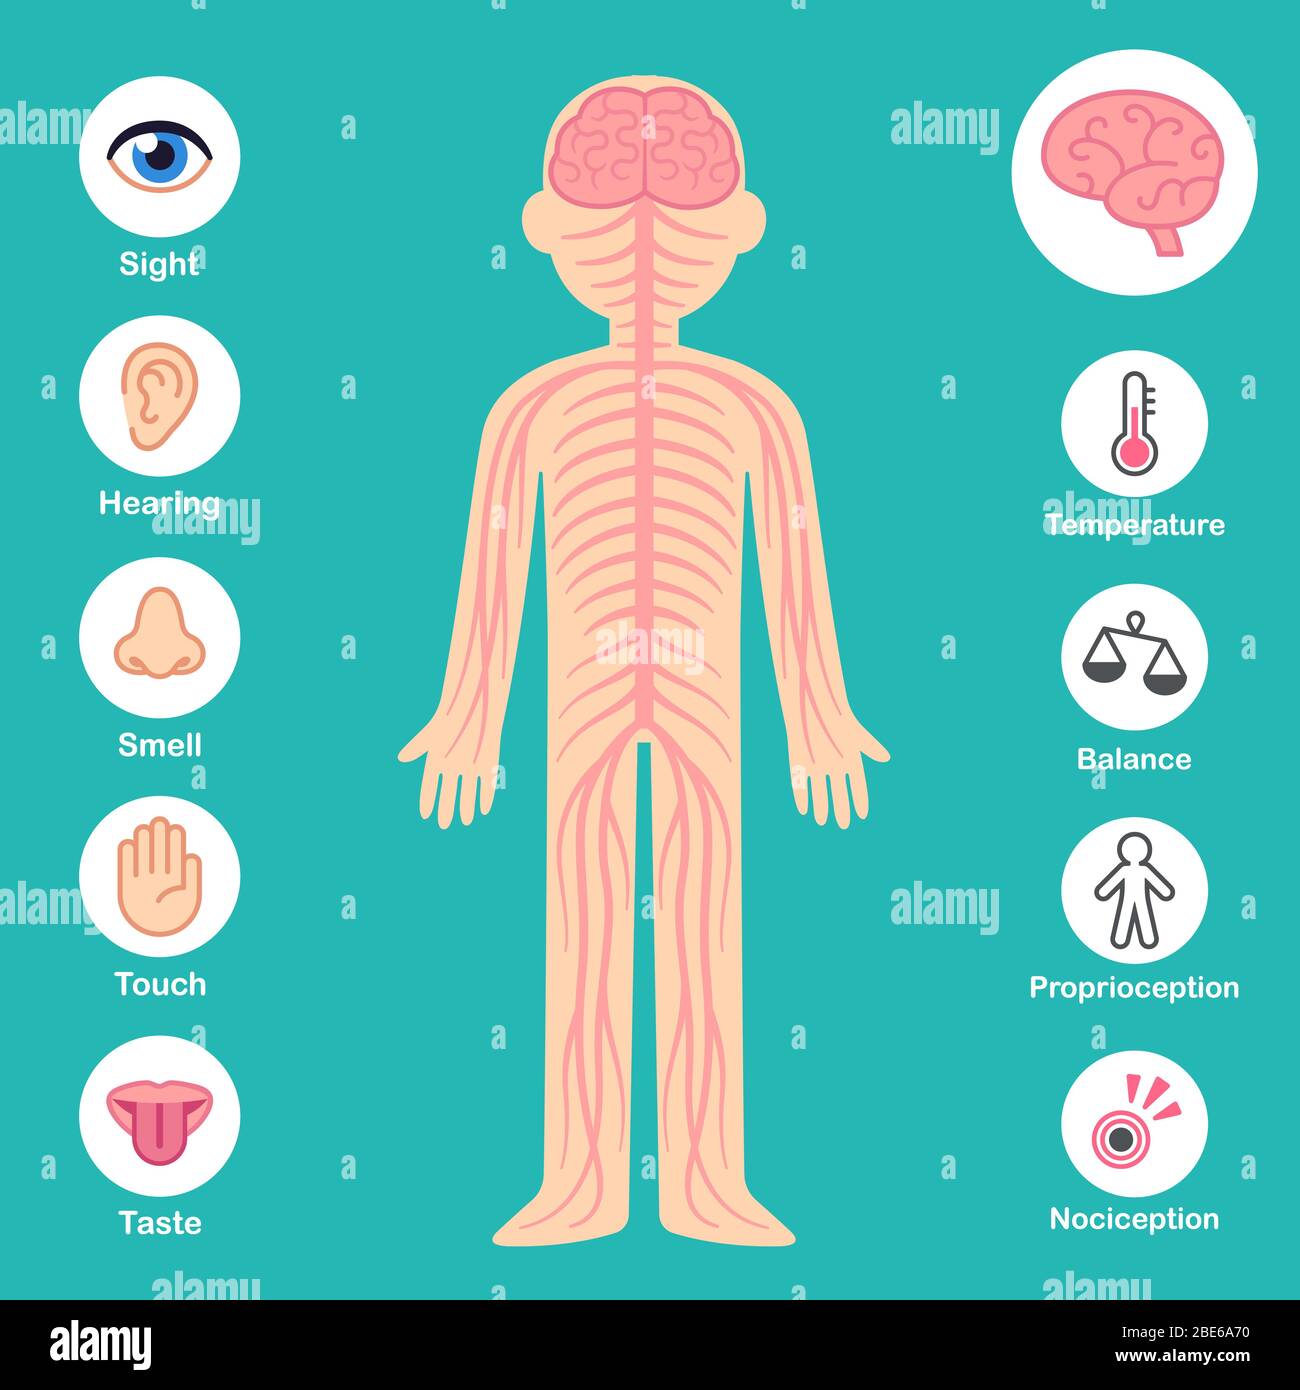 Nervous system infographic chart. Brain and nerves on body silhouette, senses and perception icons. Health and medical vector illustration. Stock Vector